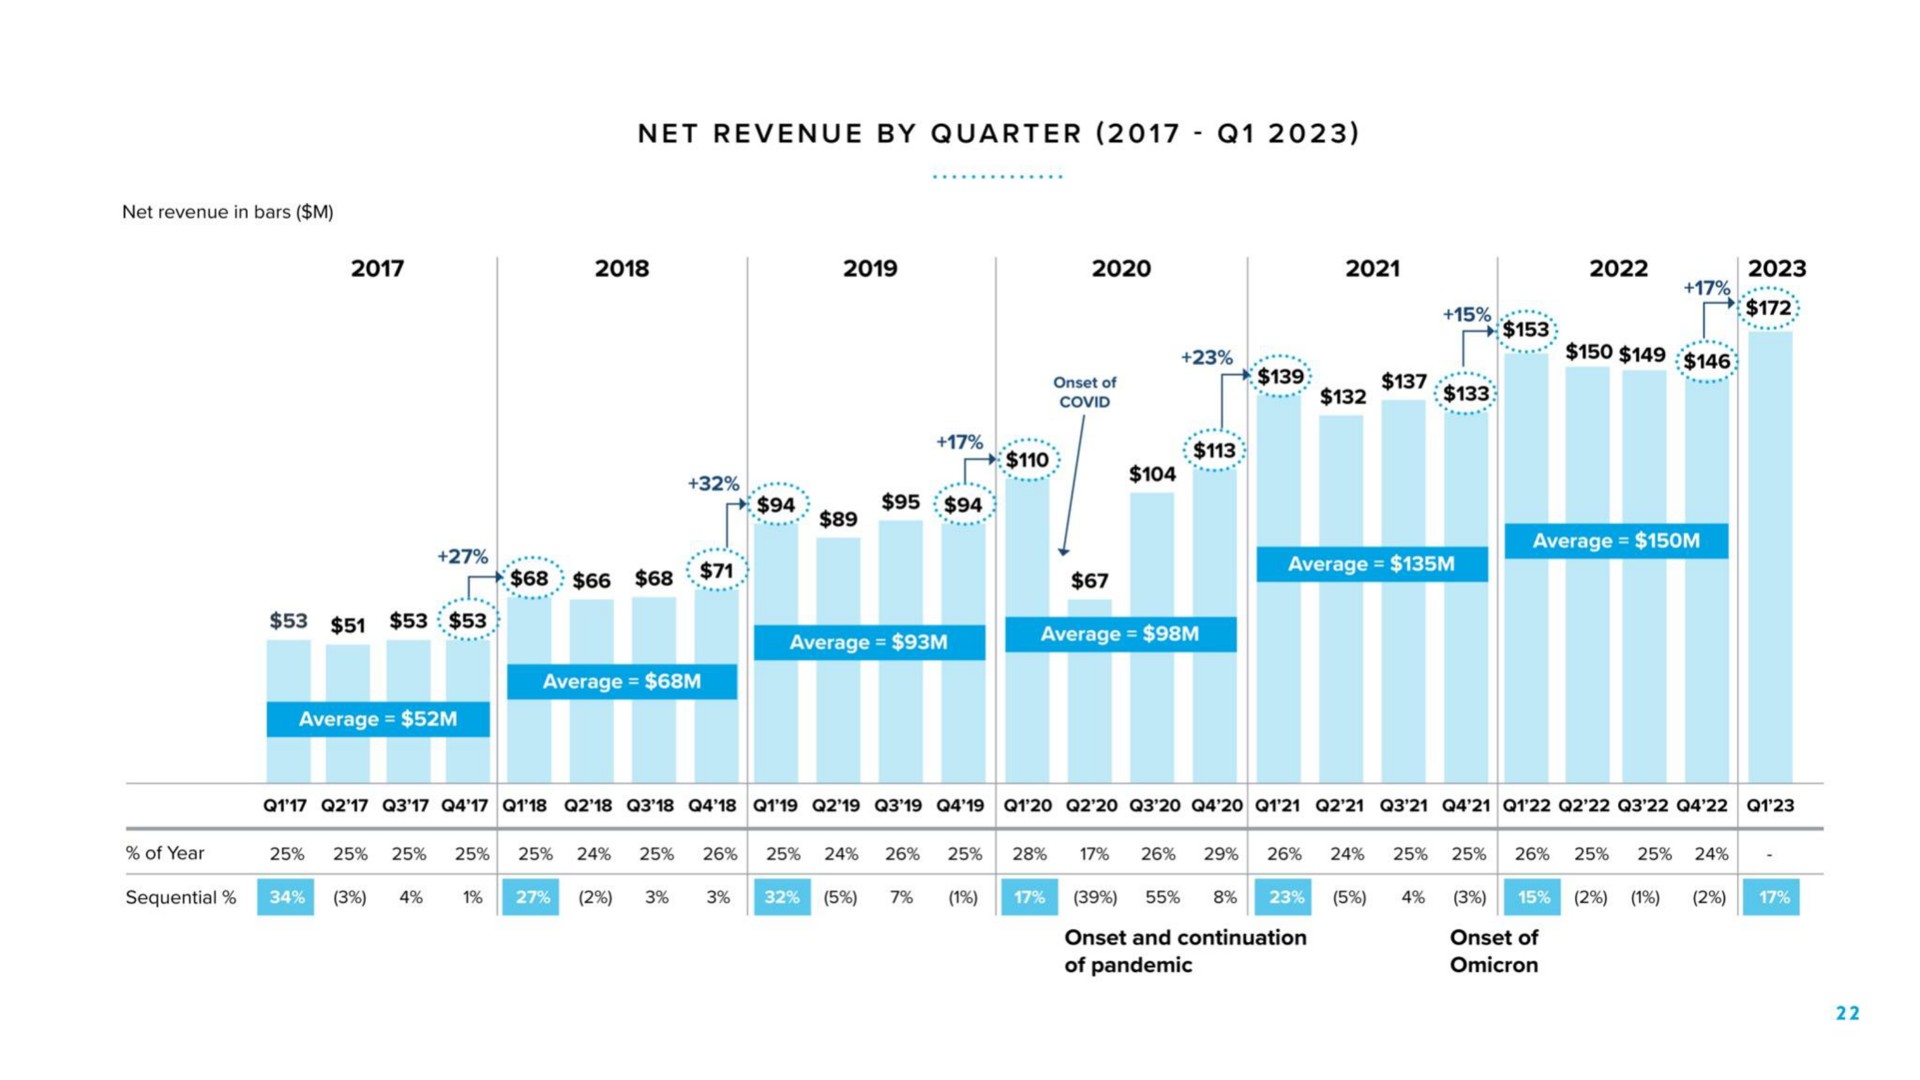 net revenue by quarter is on we tee gag sea | Warby Parker